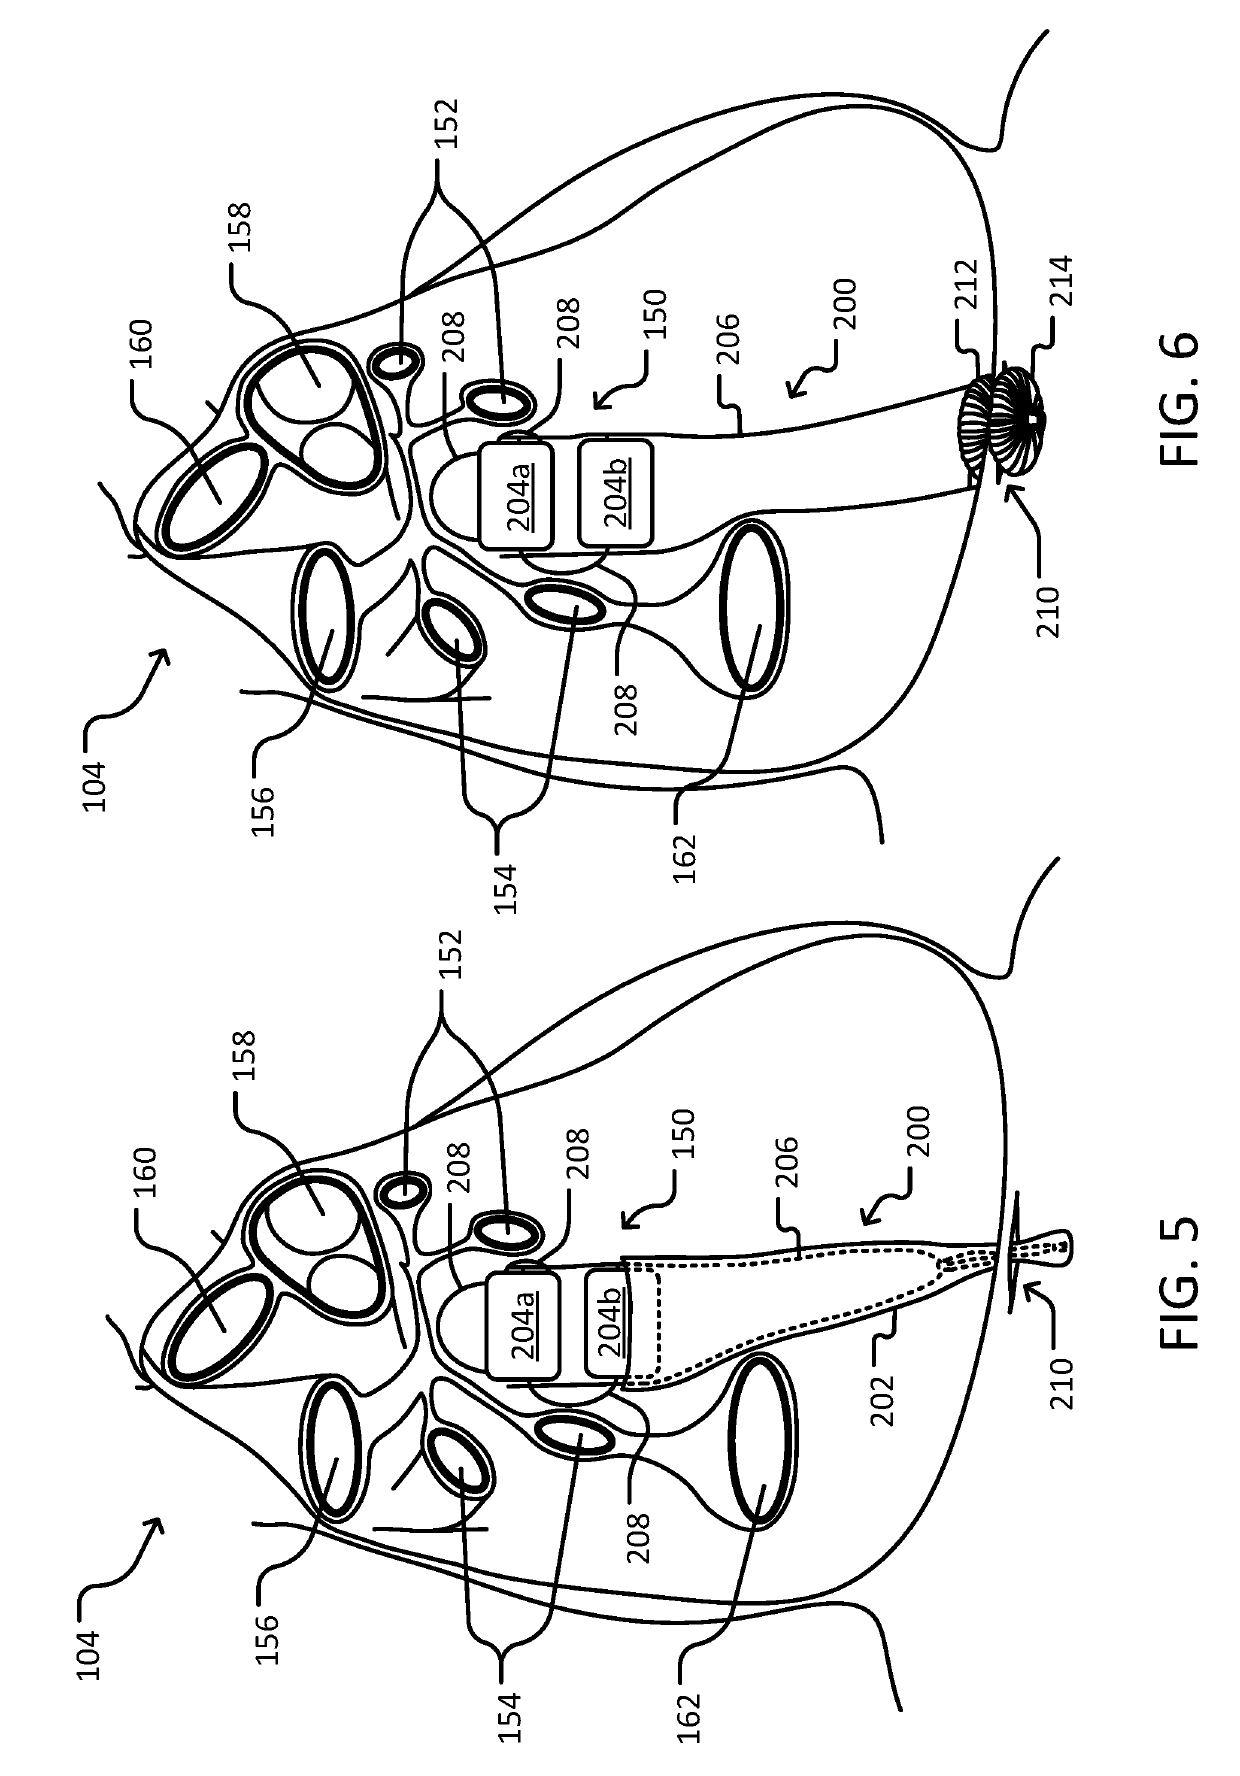 Systems and methods for implantable devices